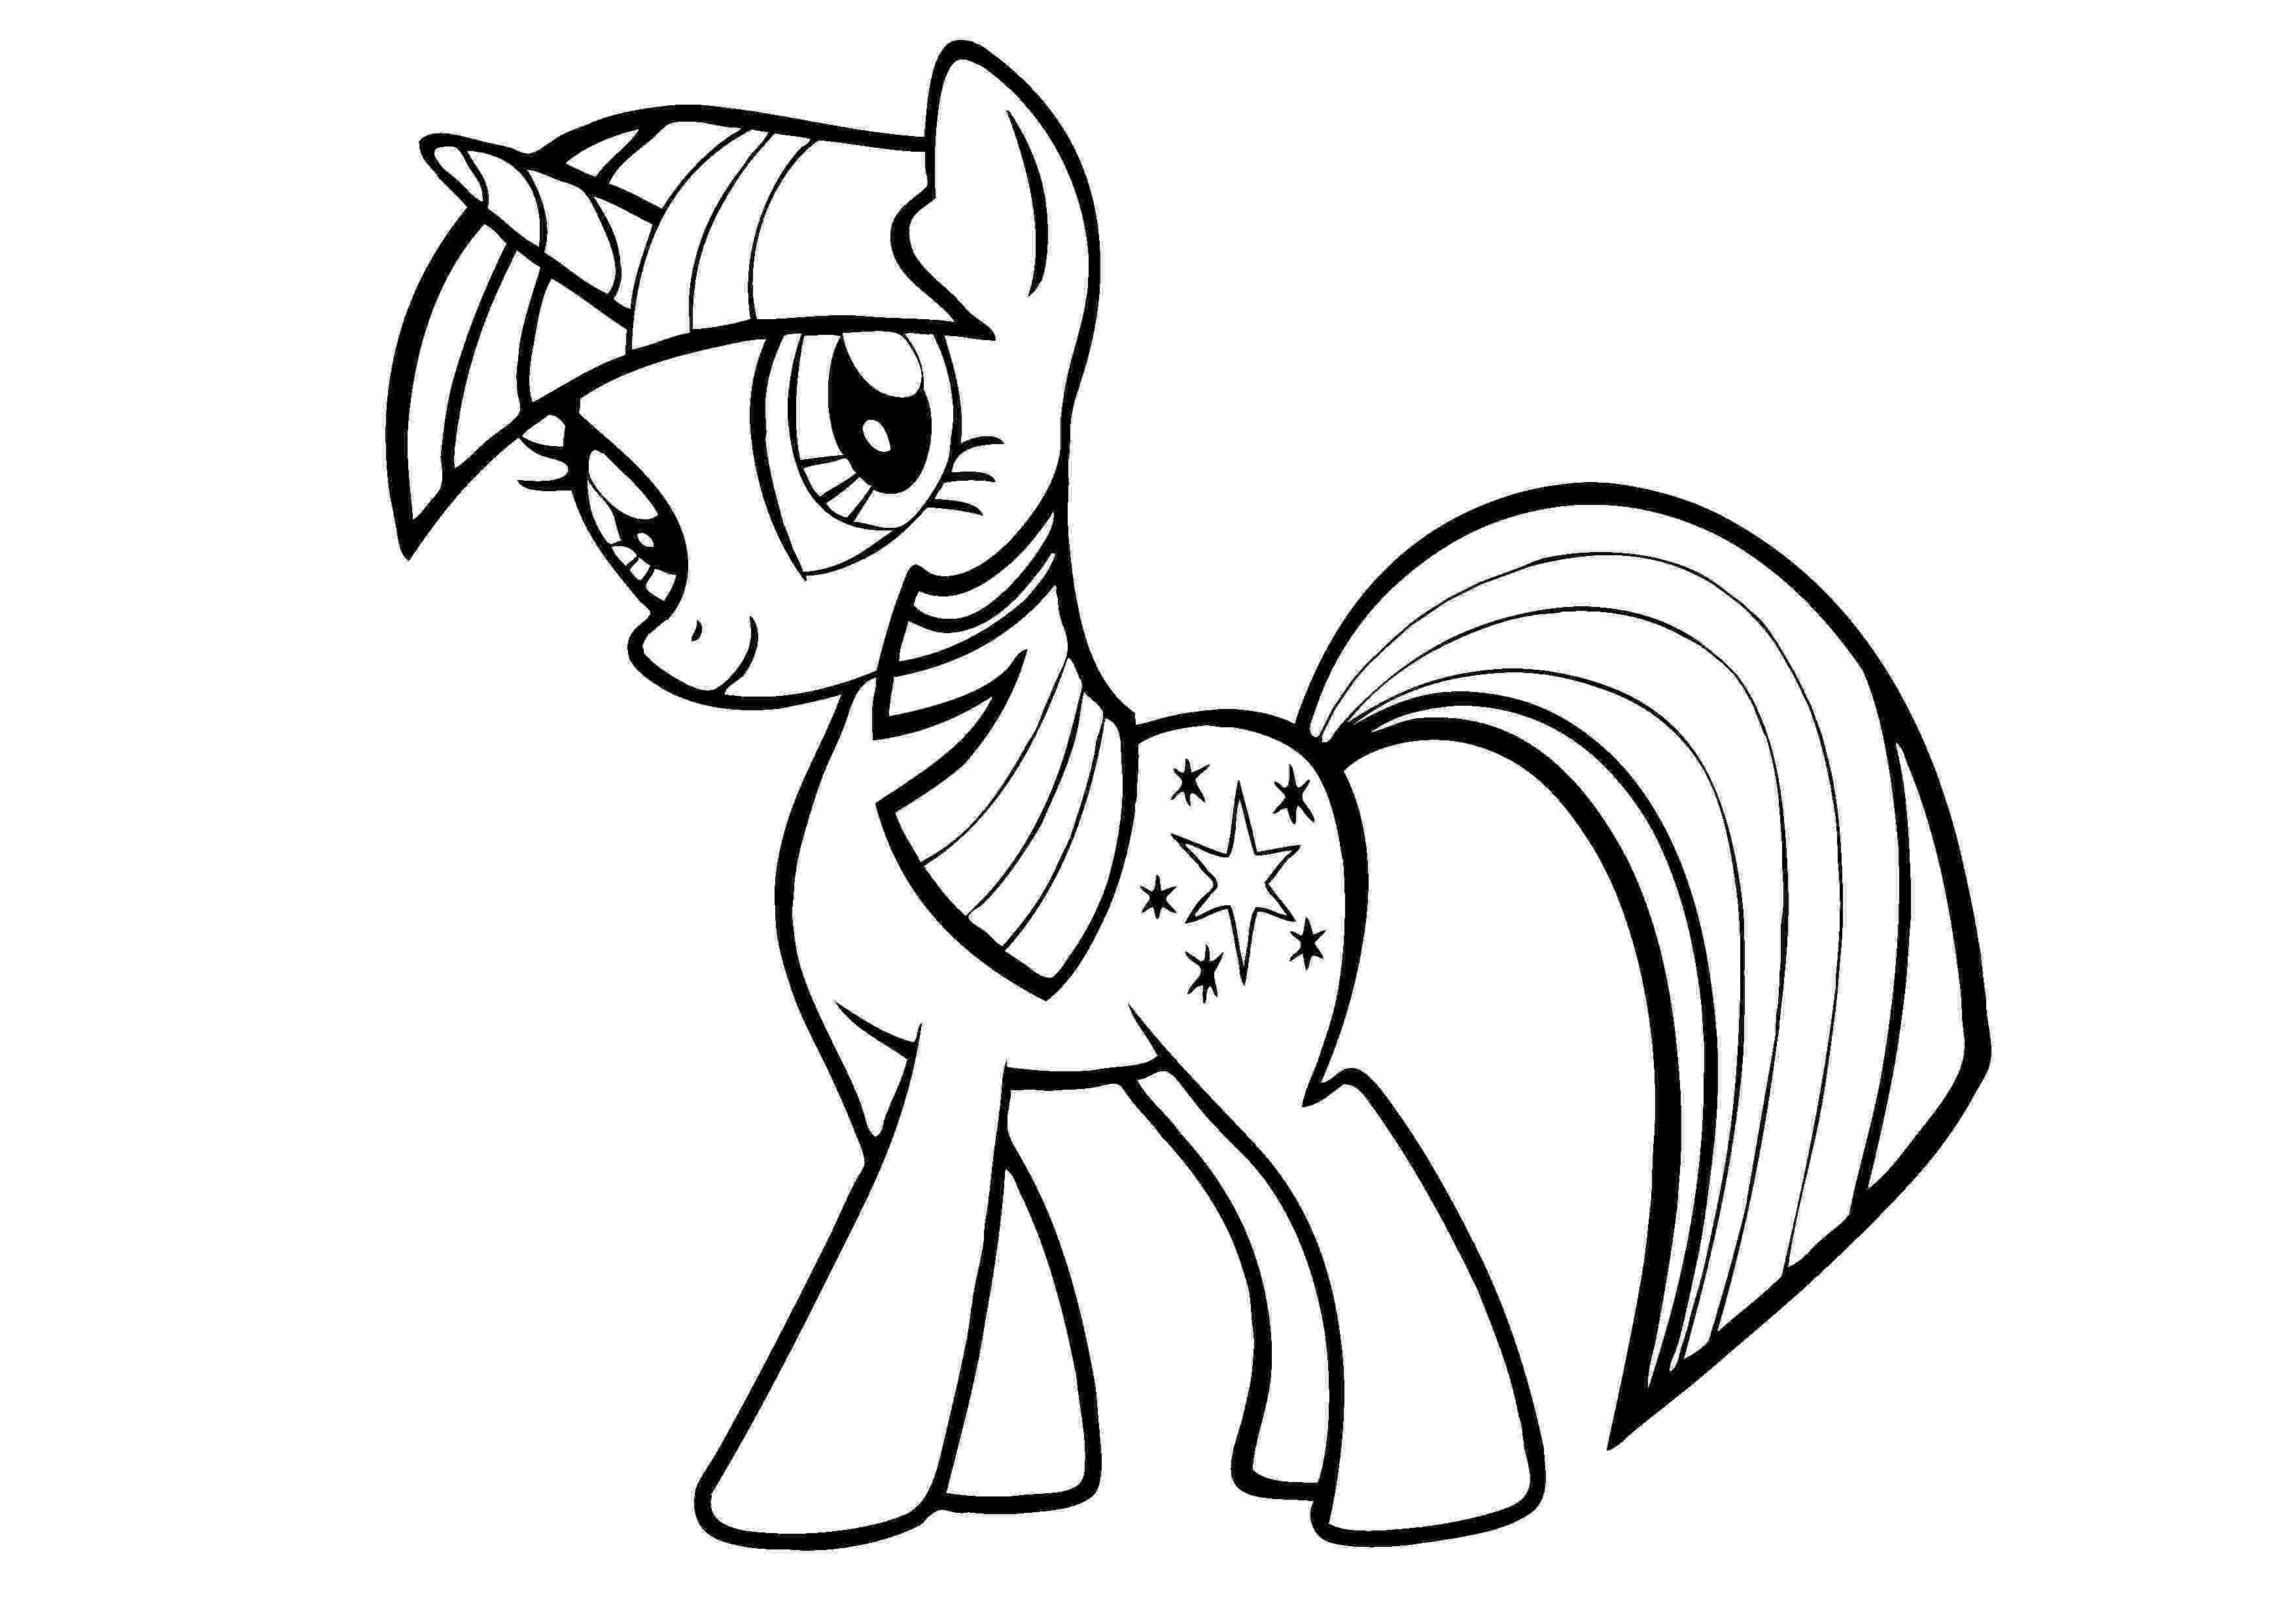 twilight sparkle colouring pages twilight sparkle coloring pages best coloring pages for kids sparkle colouring pages twilight 